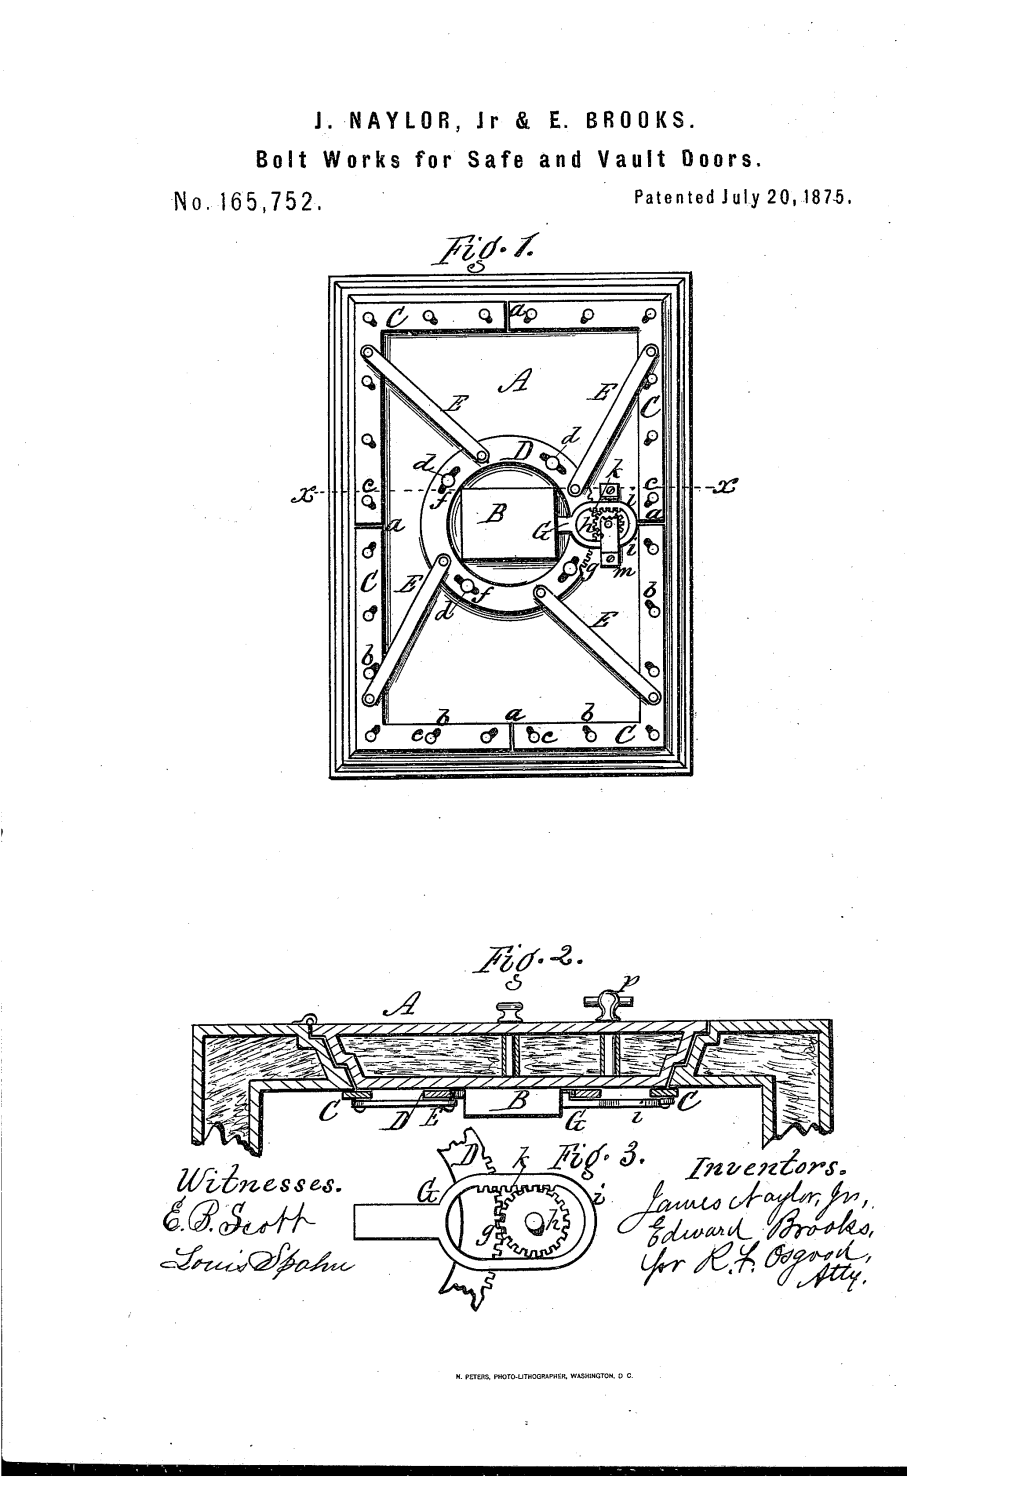 No. 165752, Patented July 20, 1875